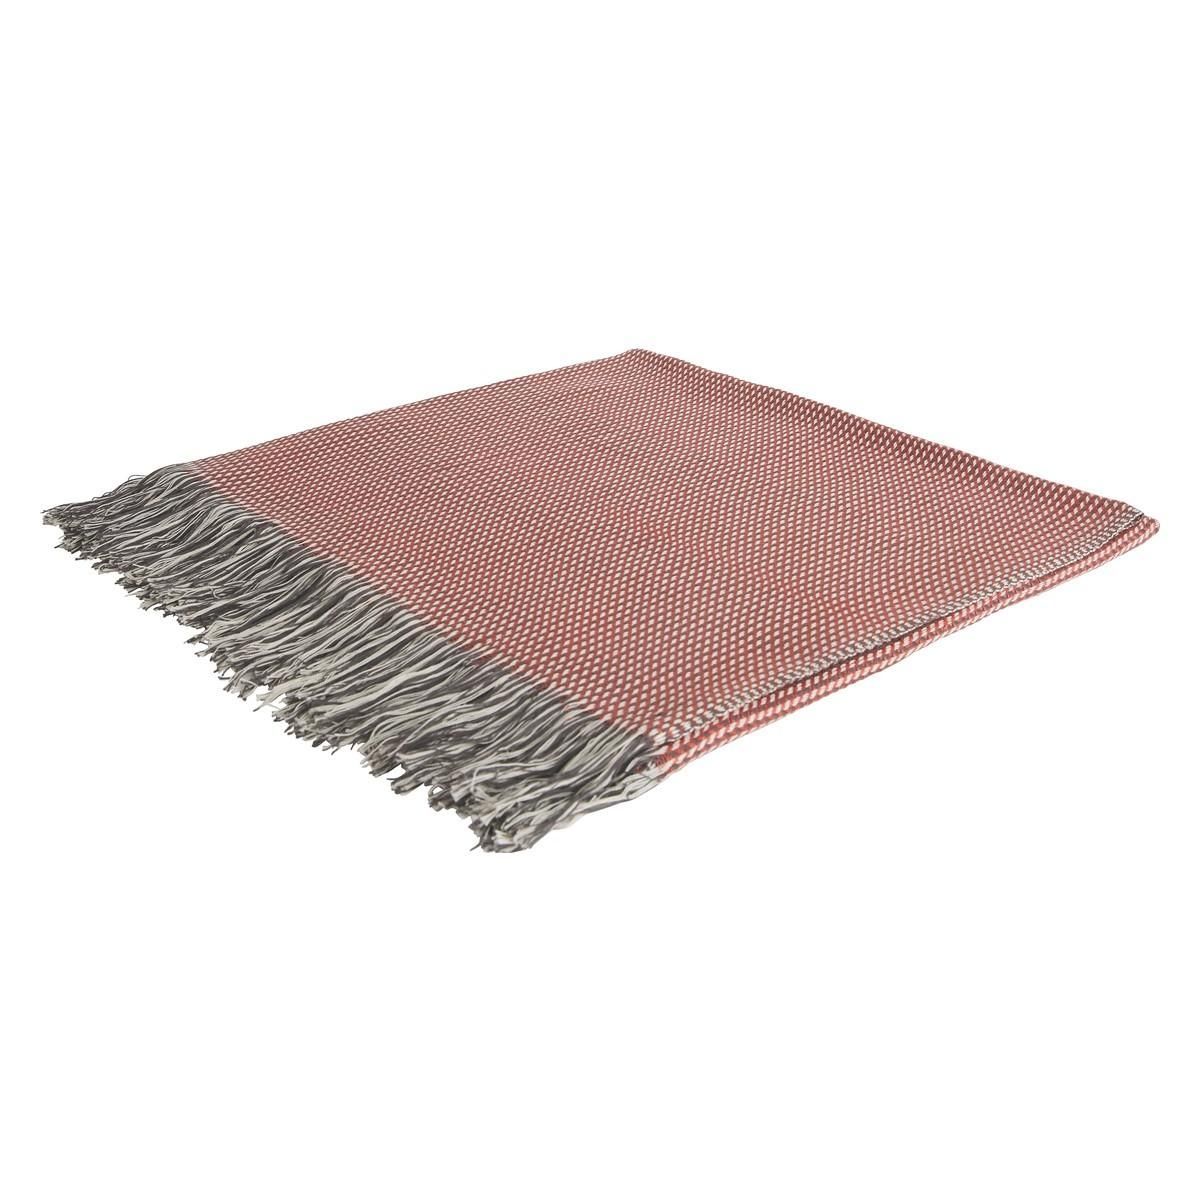 Throws; Cotton Bedspreads, Blankets & Wool Throws – Habitat Intended For Grey Throws For Sofas (View 16 of 20)